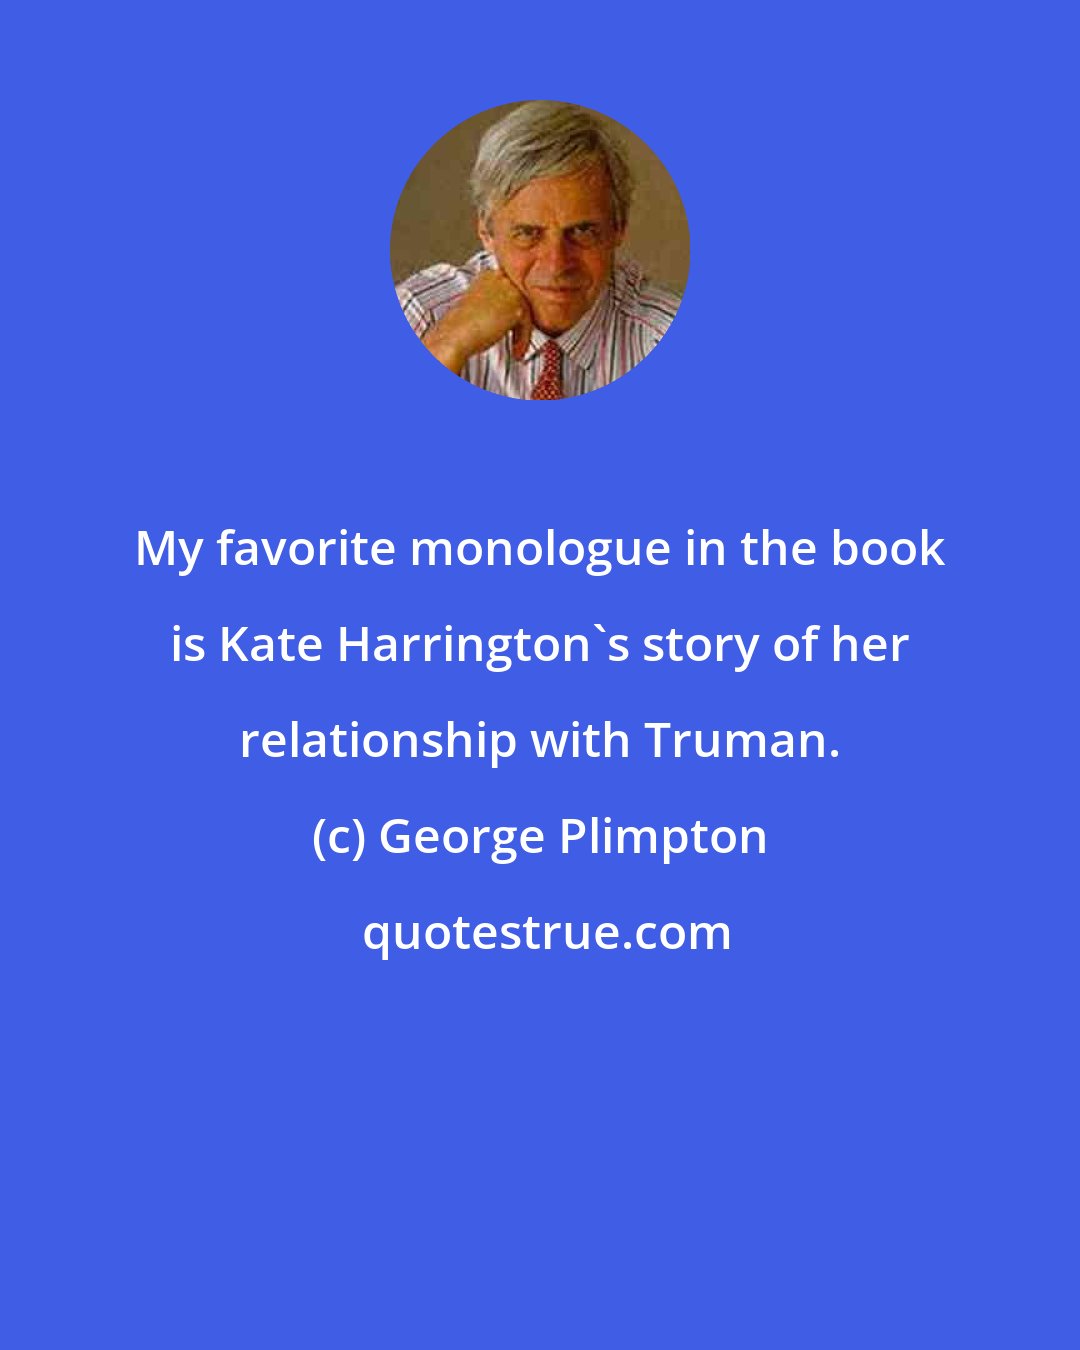 George Plimpton: My favorite monologue in the book is Kate Harrington's story of her relationship with Truman.